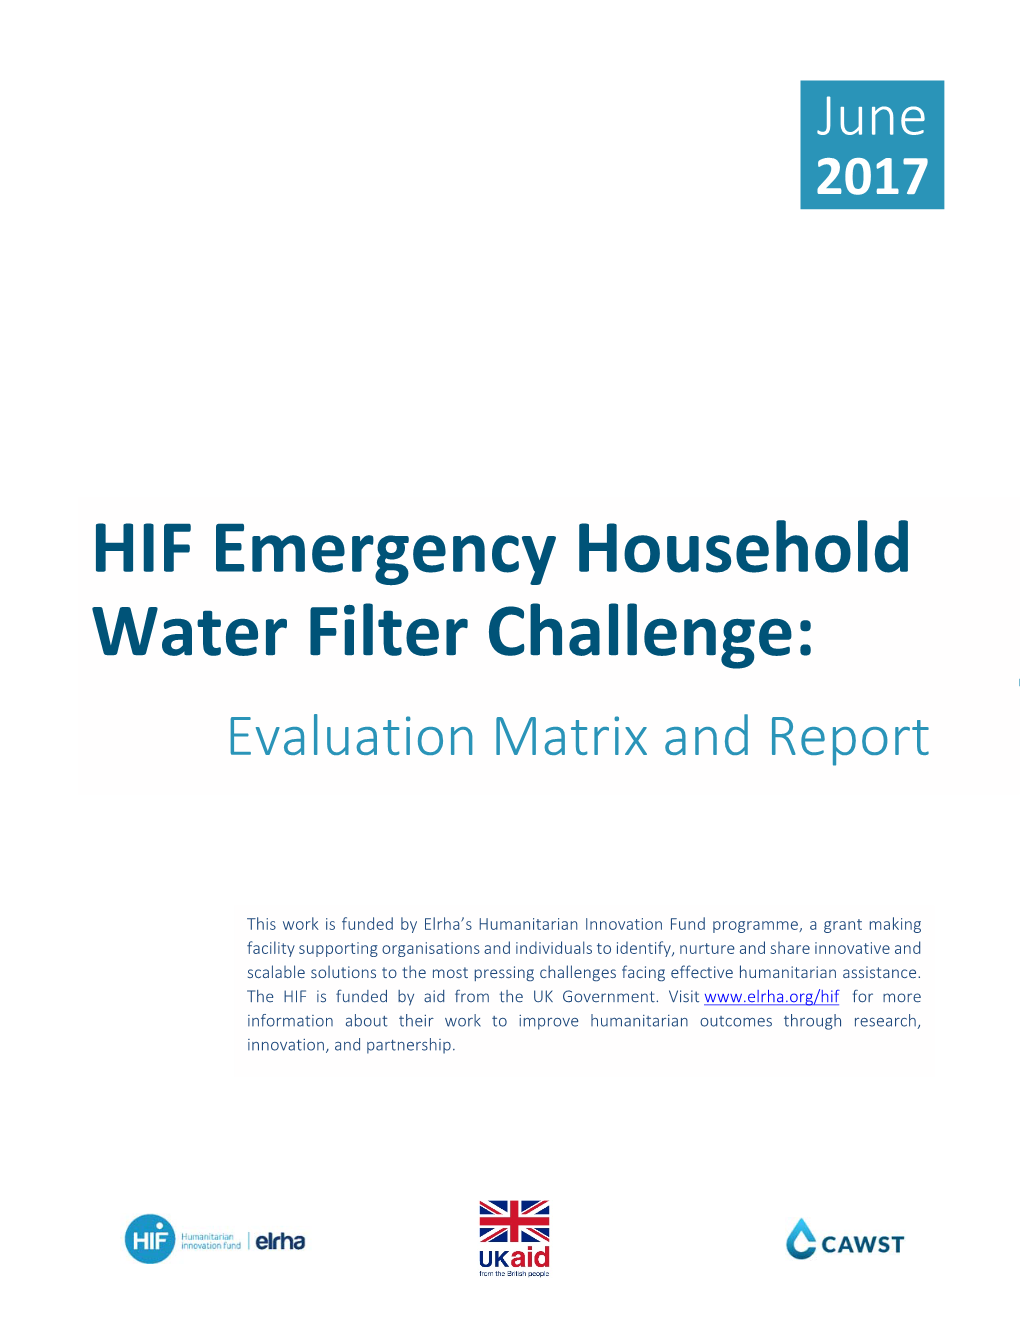 HIF Emergency Household Water Filter Challenge: 0 Evaluation Matrix and Report